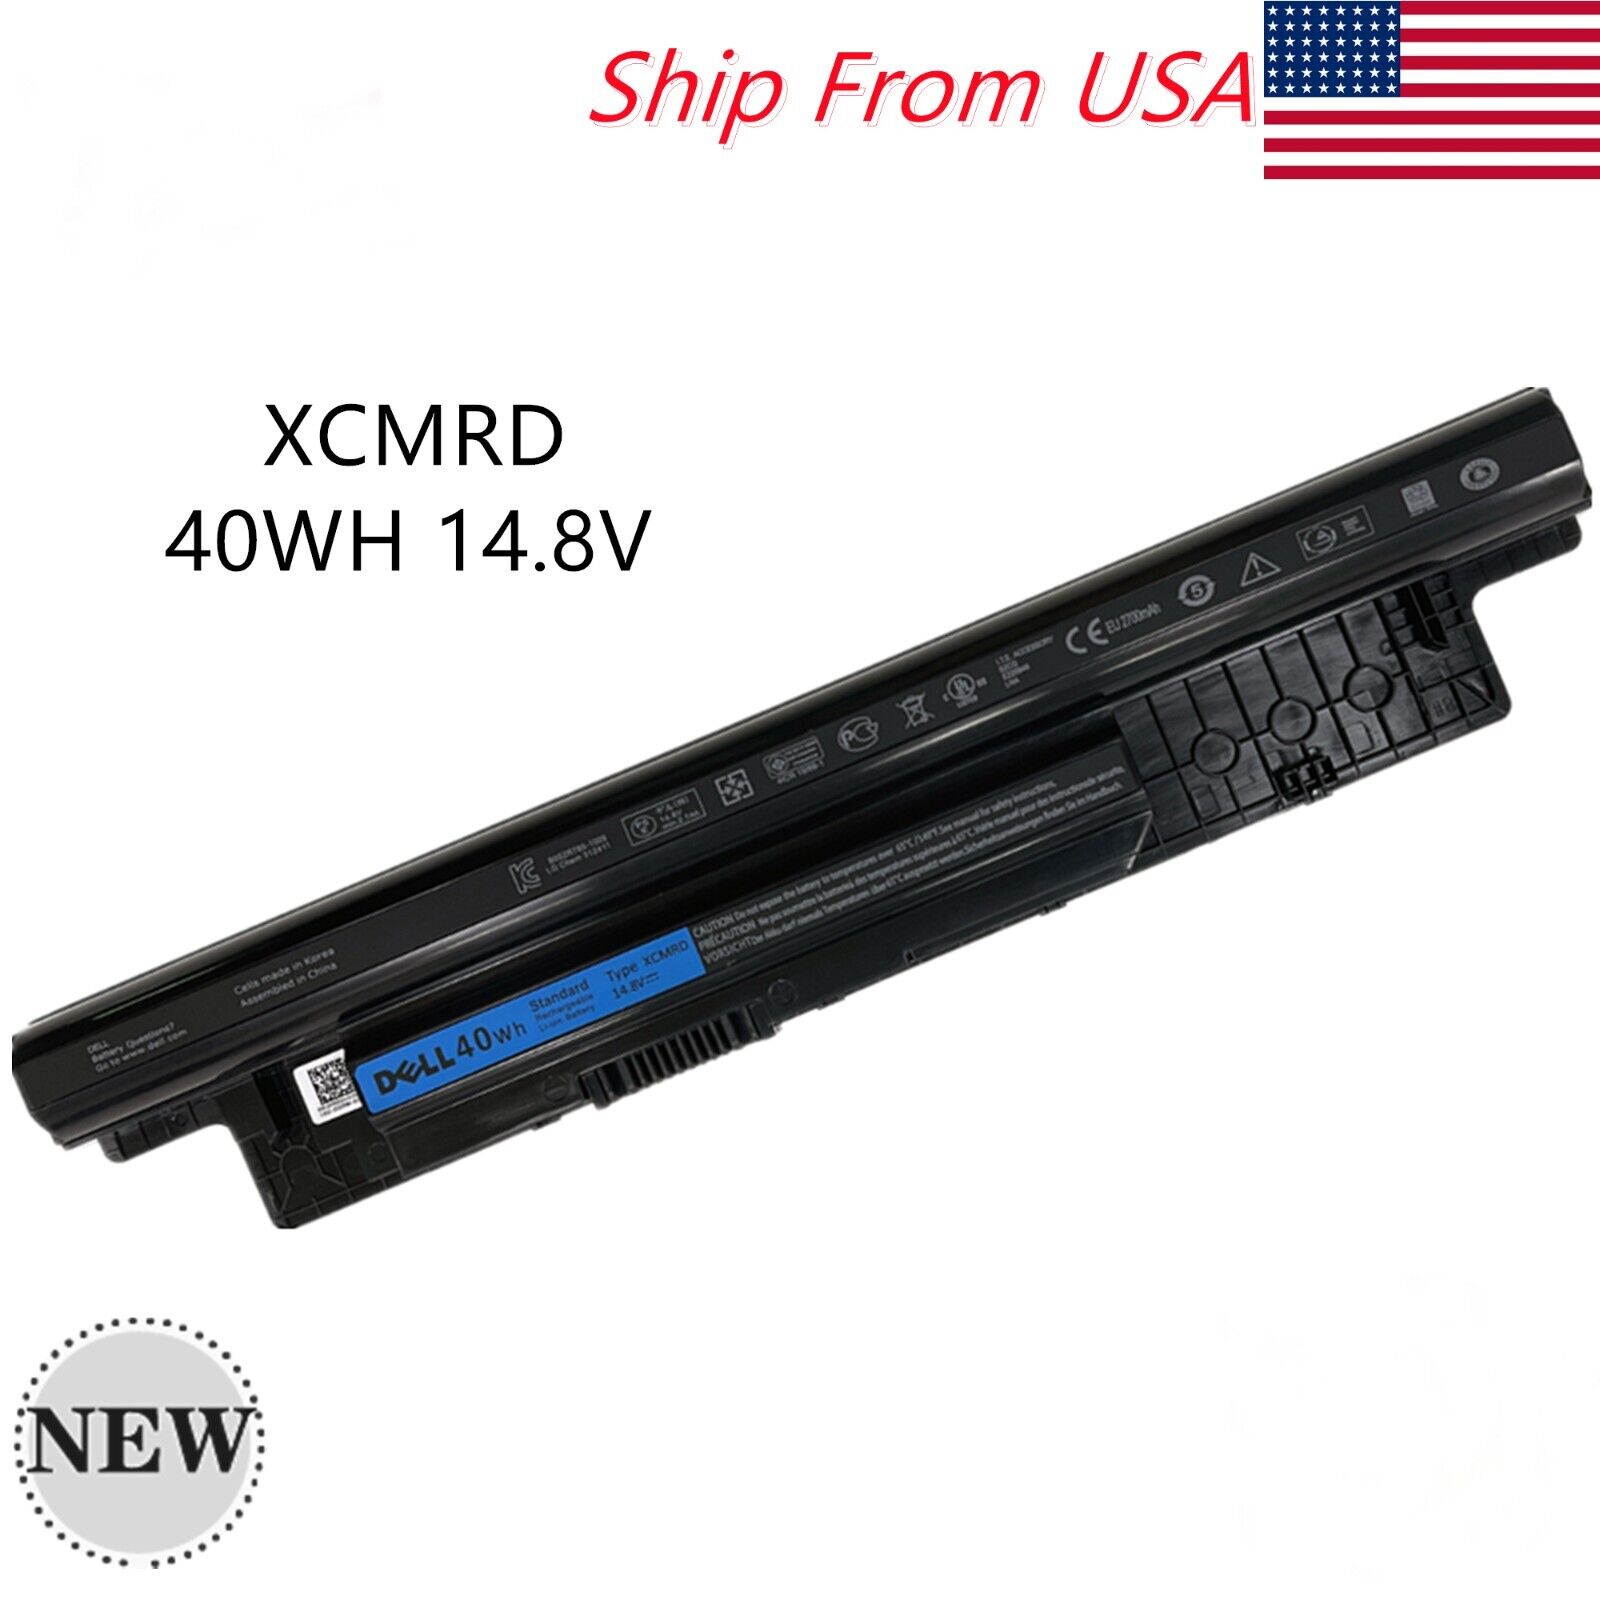 Genuine 40Wh XCMRD Battery For Dell Inspiron 3421 5421 5437 3531 3537 3541 3737